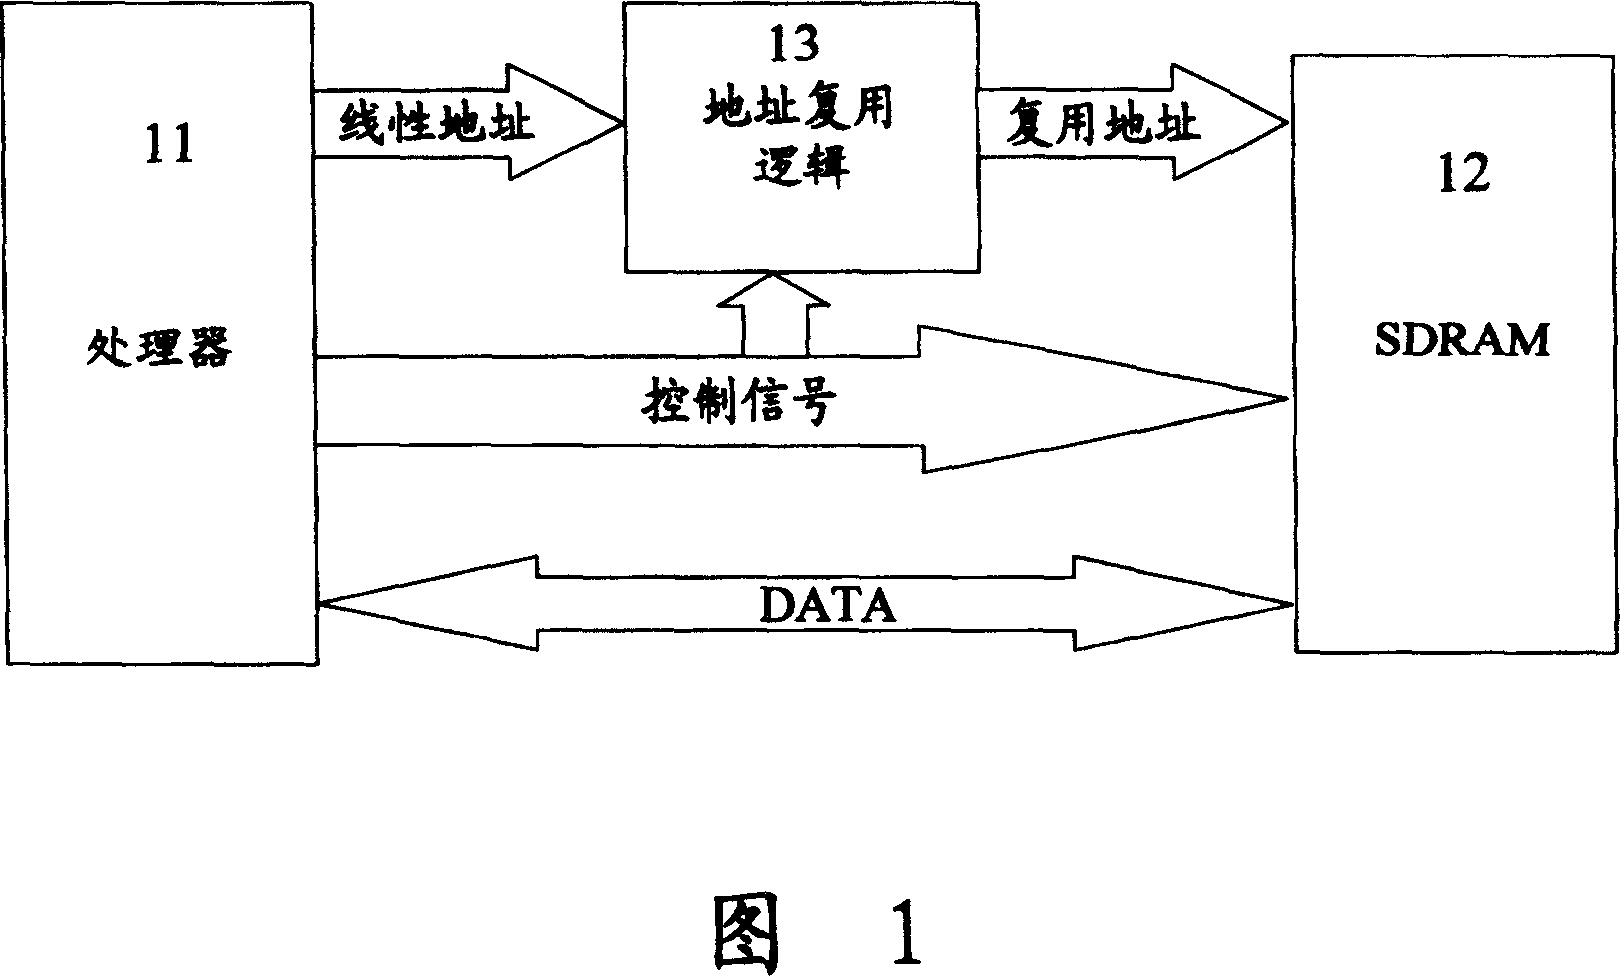 Address multiplexing logic implementation method with SDRAM compatible